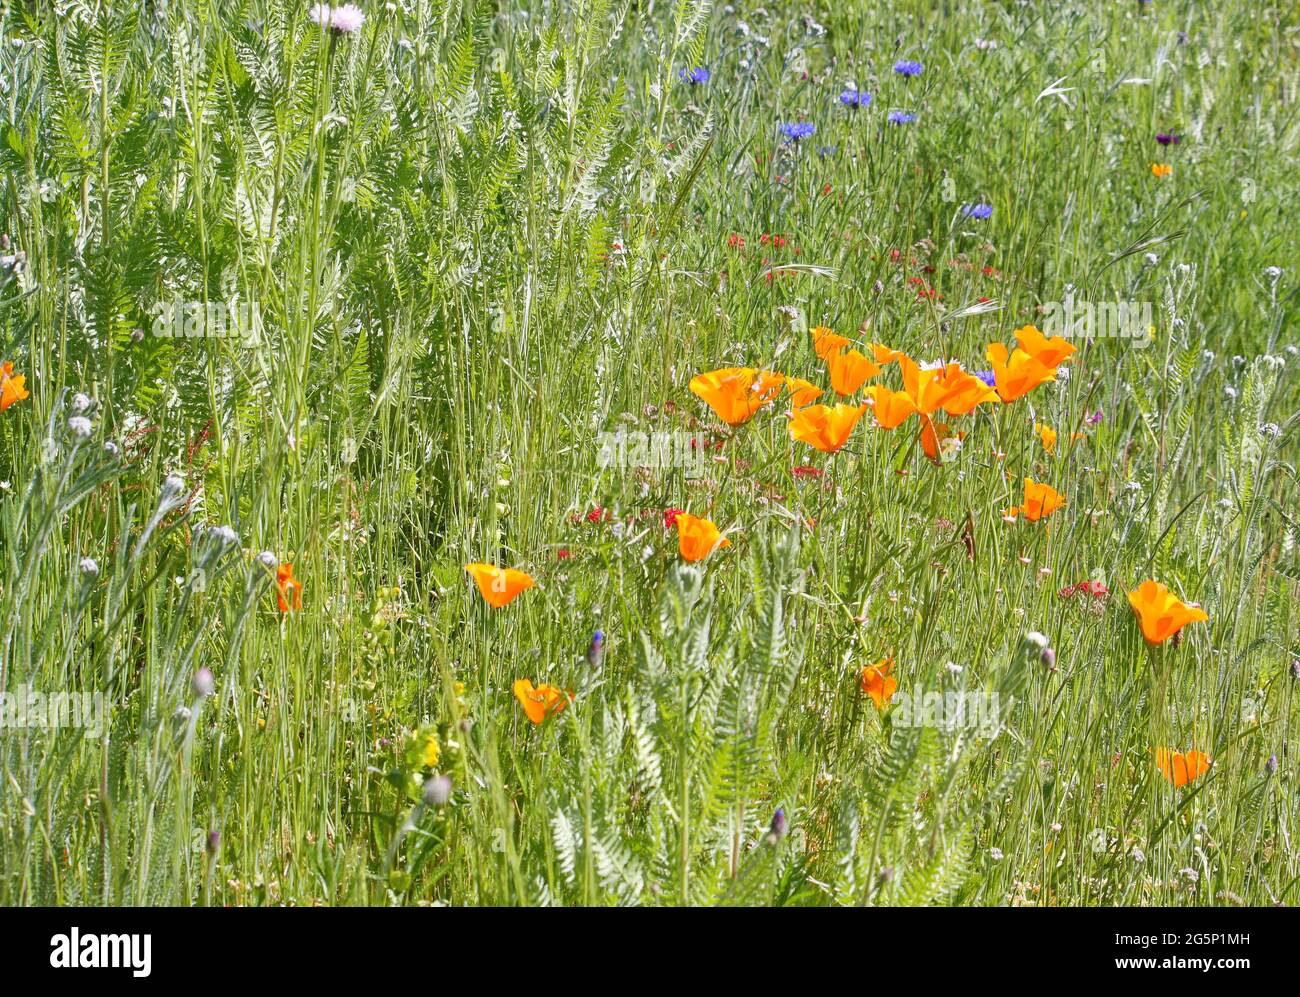 Section of a wildflower meadow, attractive to bees and butterflies, featuring yellow California poppies and blue cornflowers Stock Photo